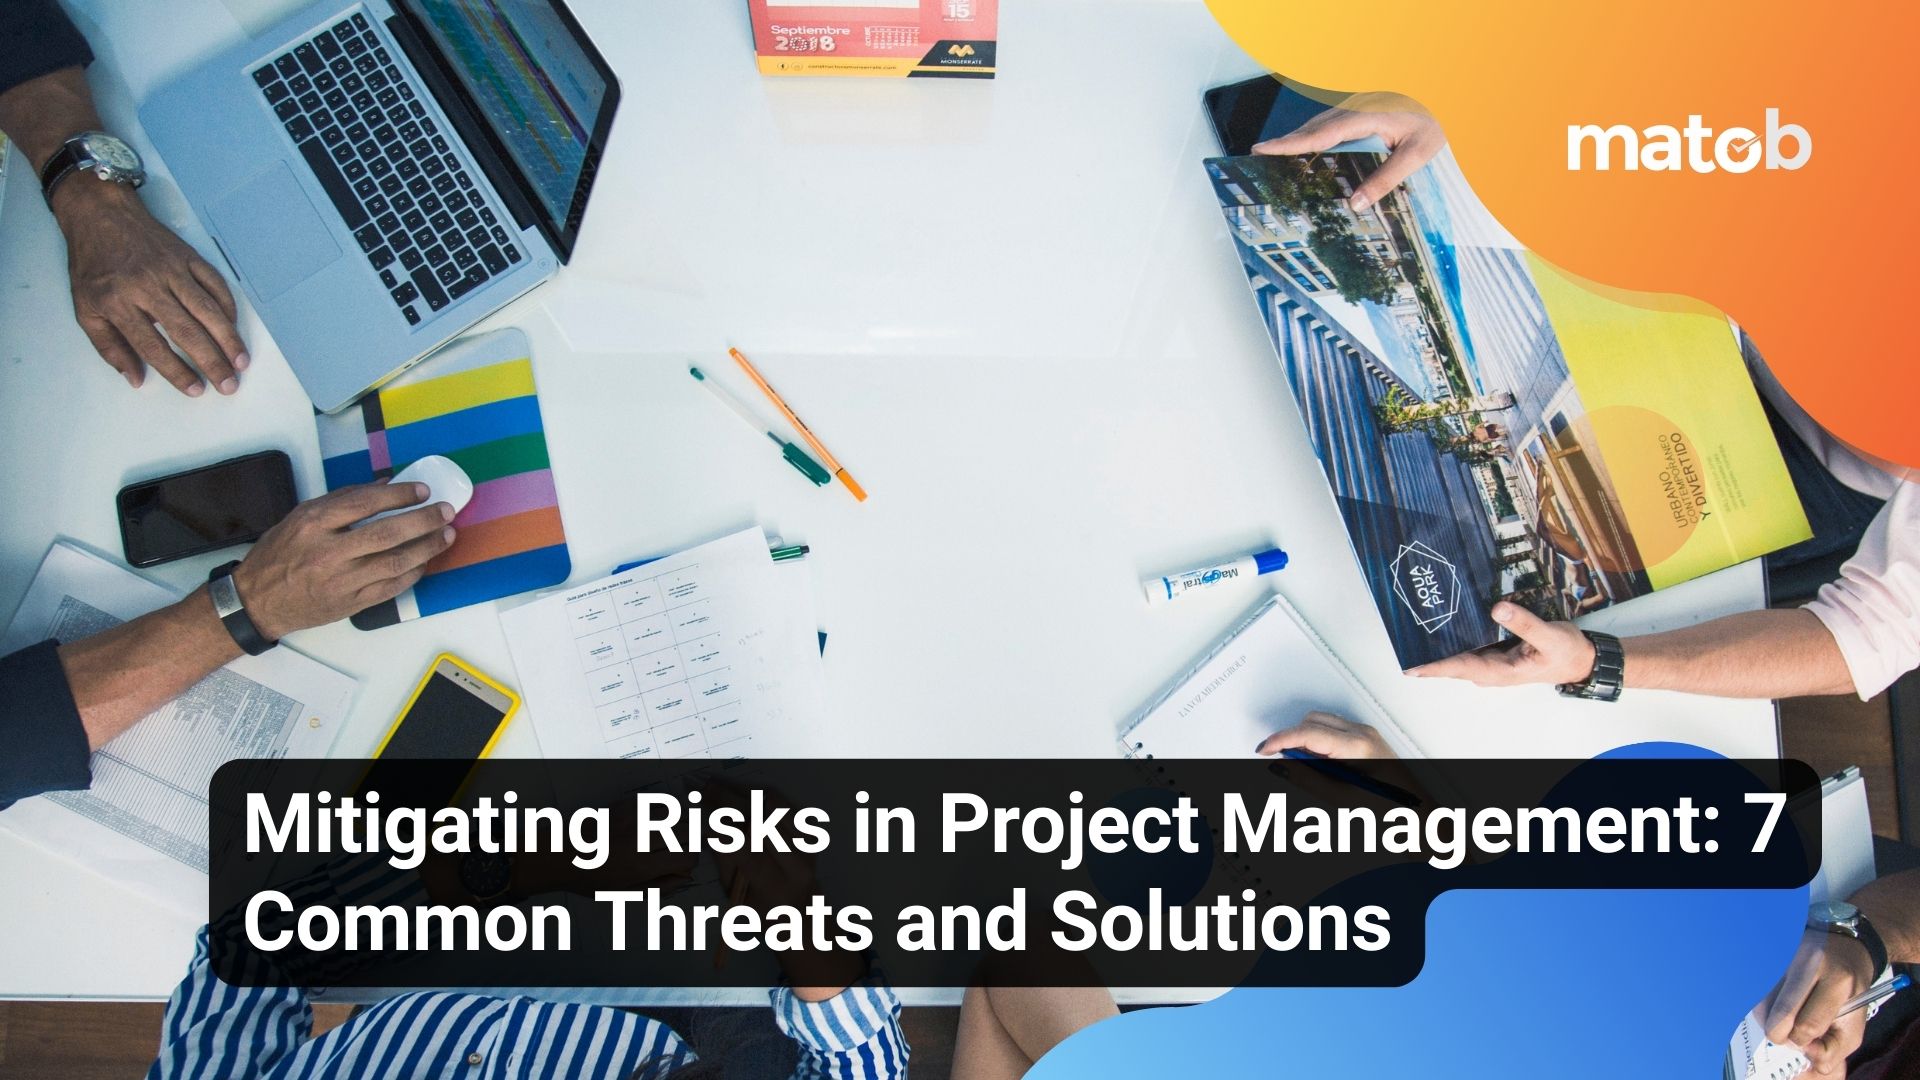 Mitigating Risks in Project Management: 7 Common Threats and Solutions